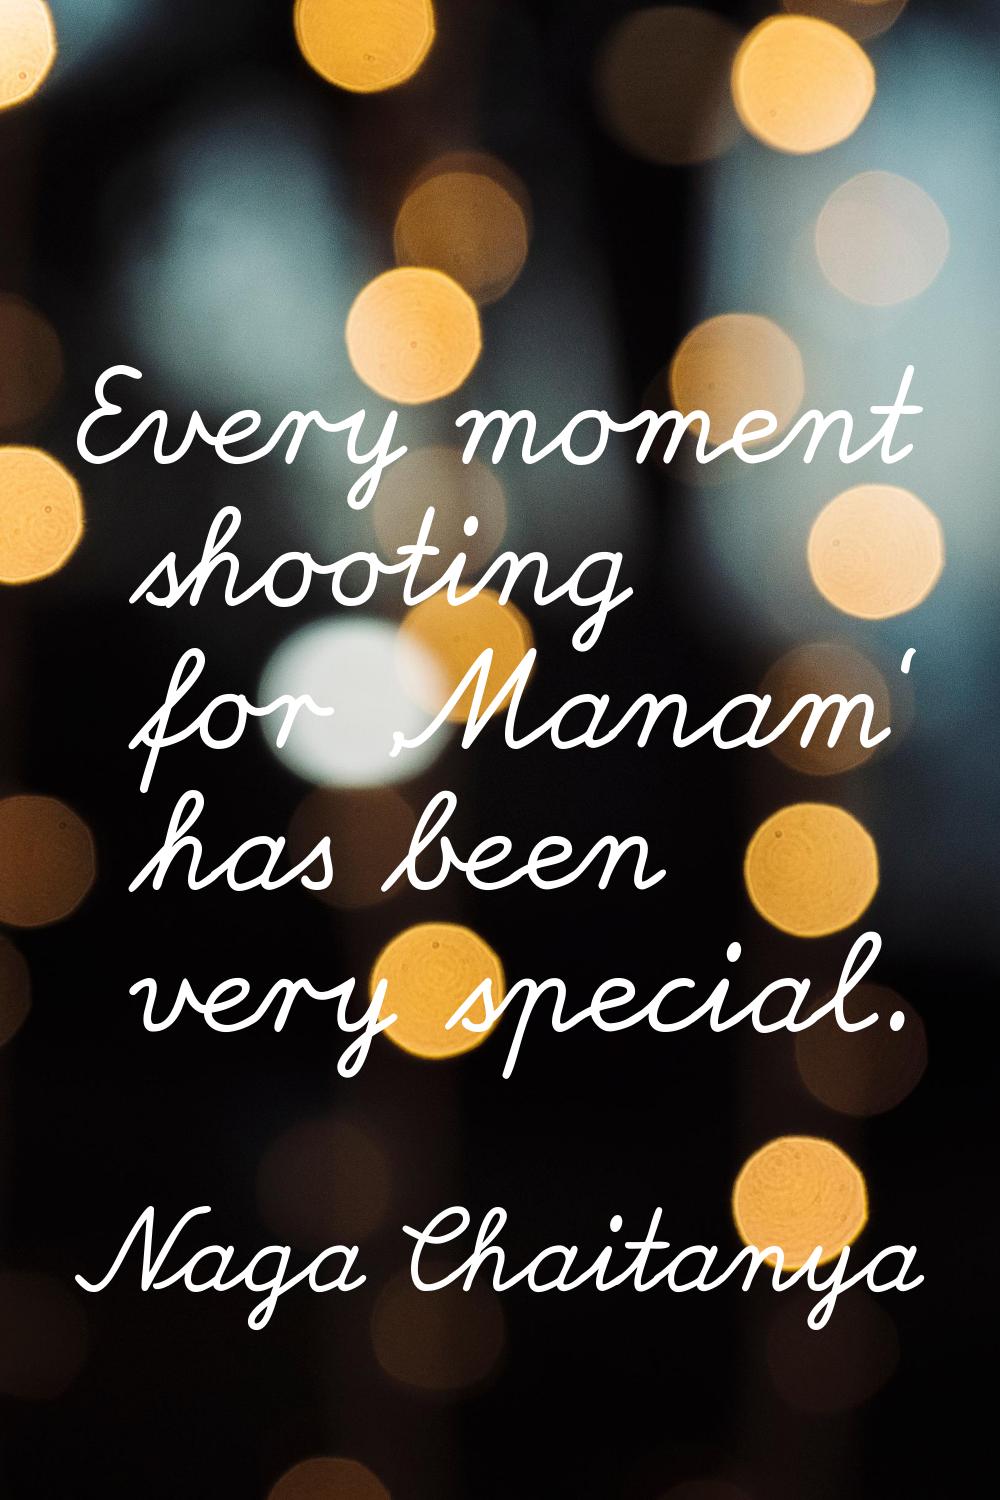 Every moment shooting for 'Manam' has been very special.